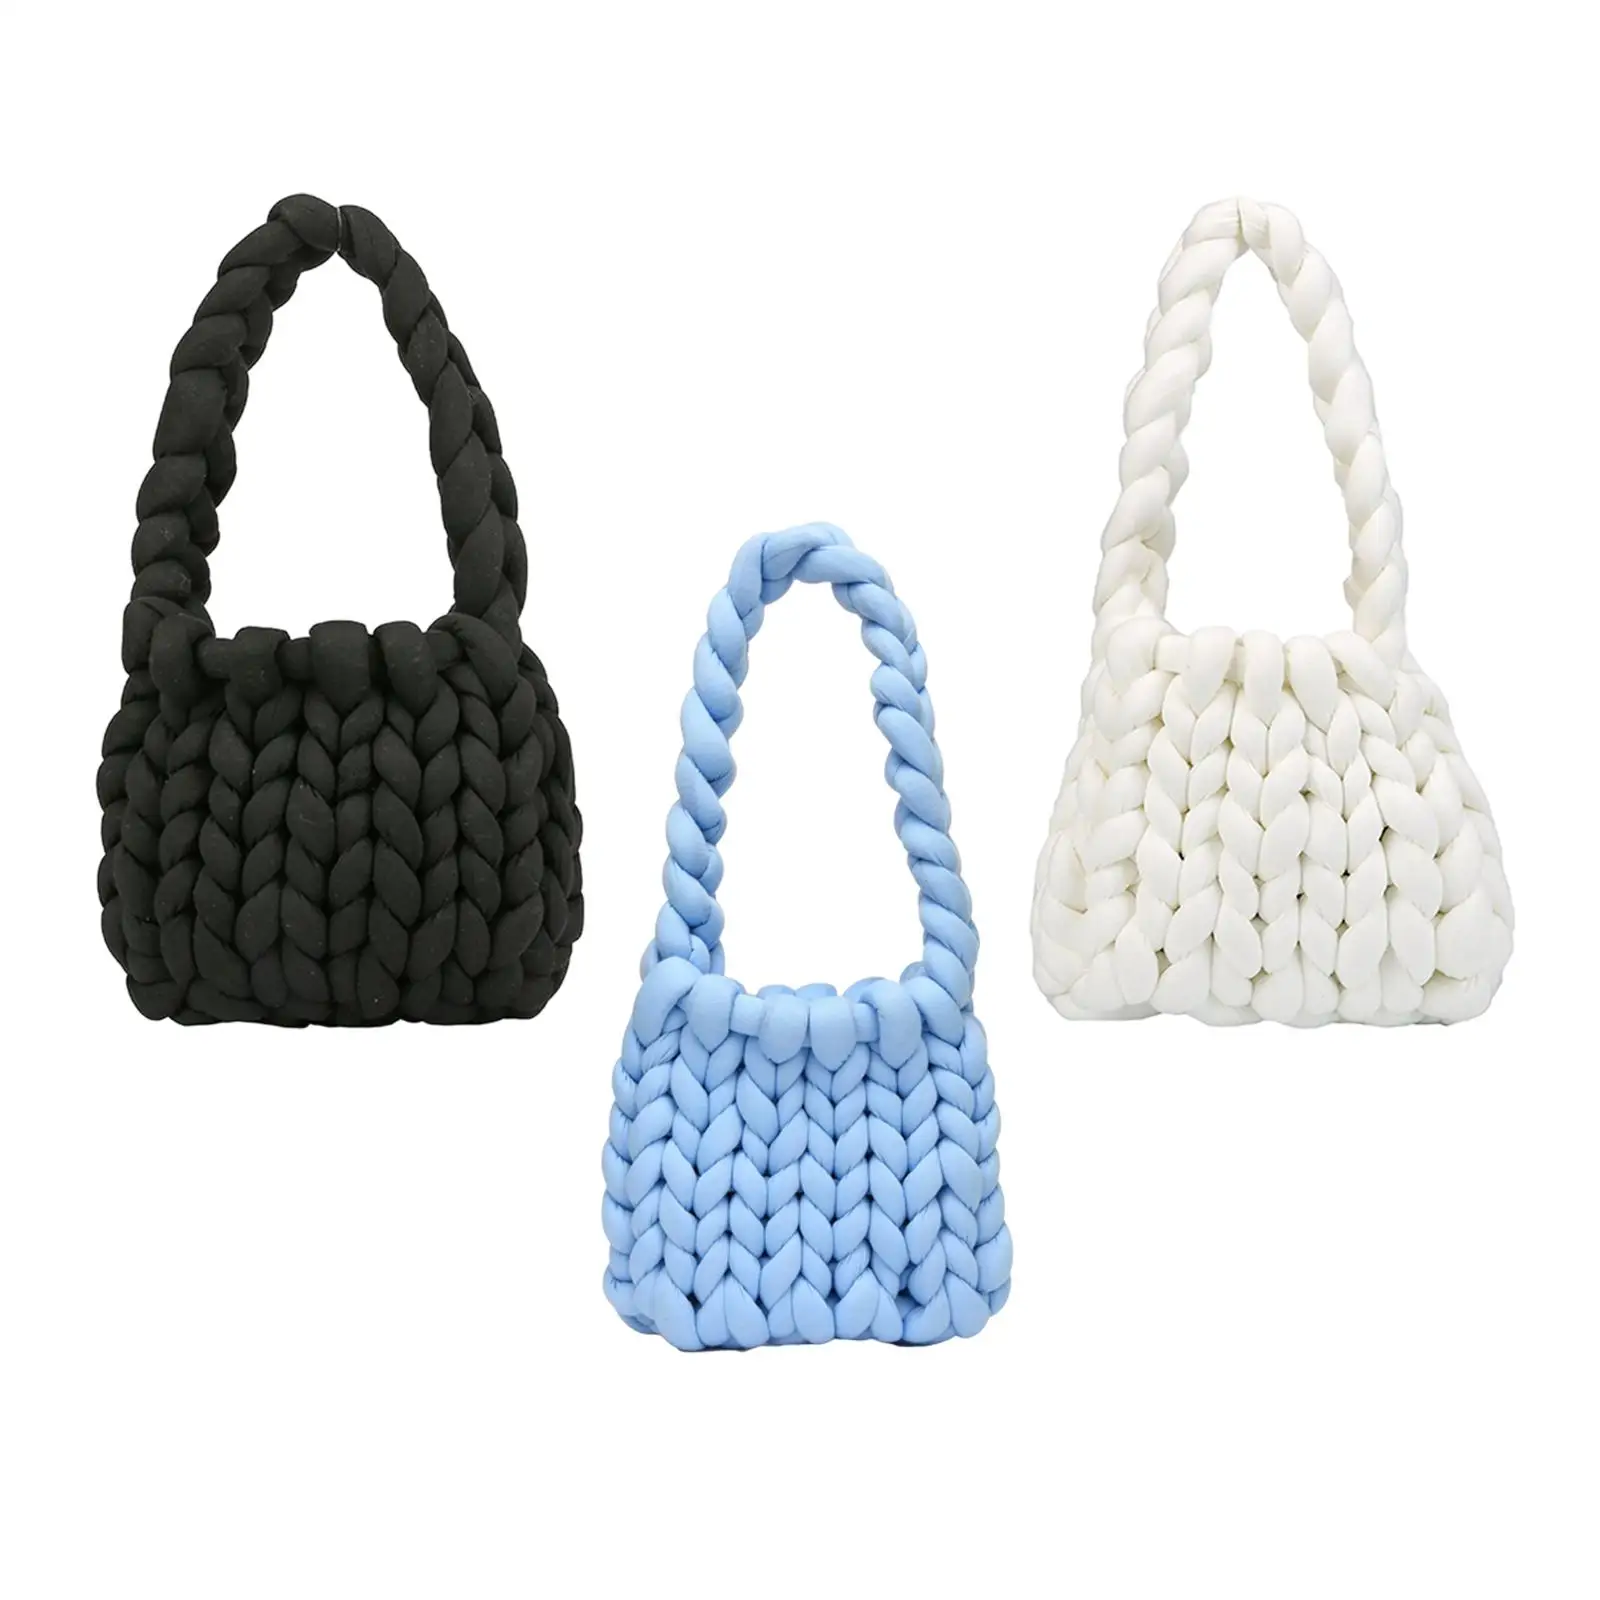 Chunky Yarn Small Tote Bag Breathable Soft Hand Knitting for Home Decor